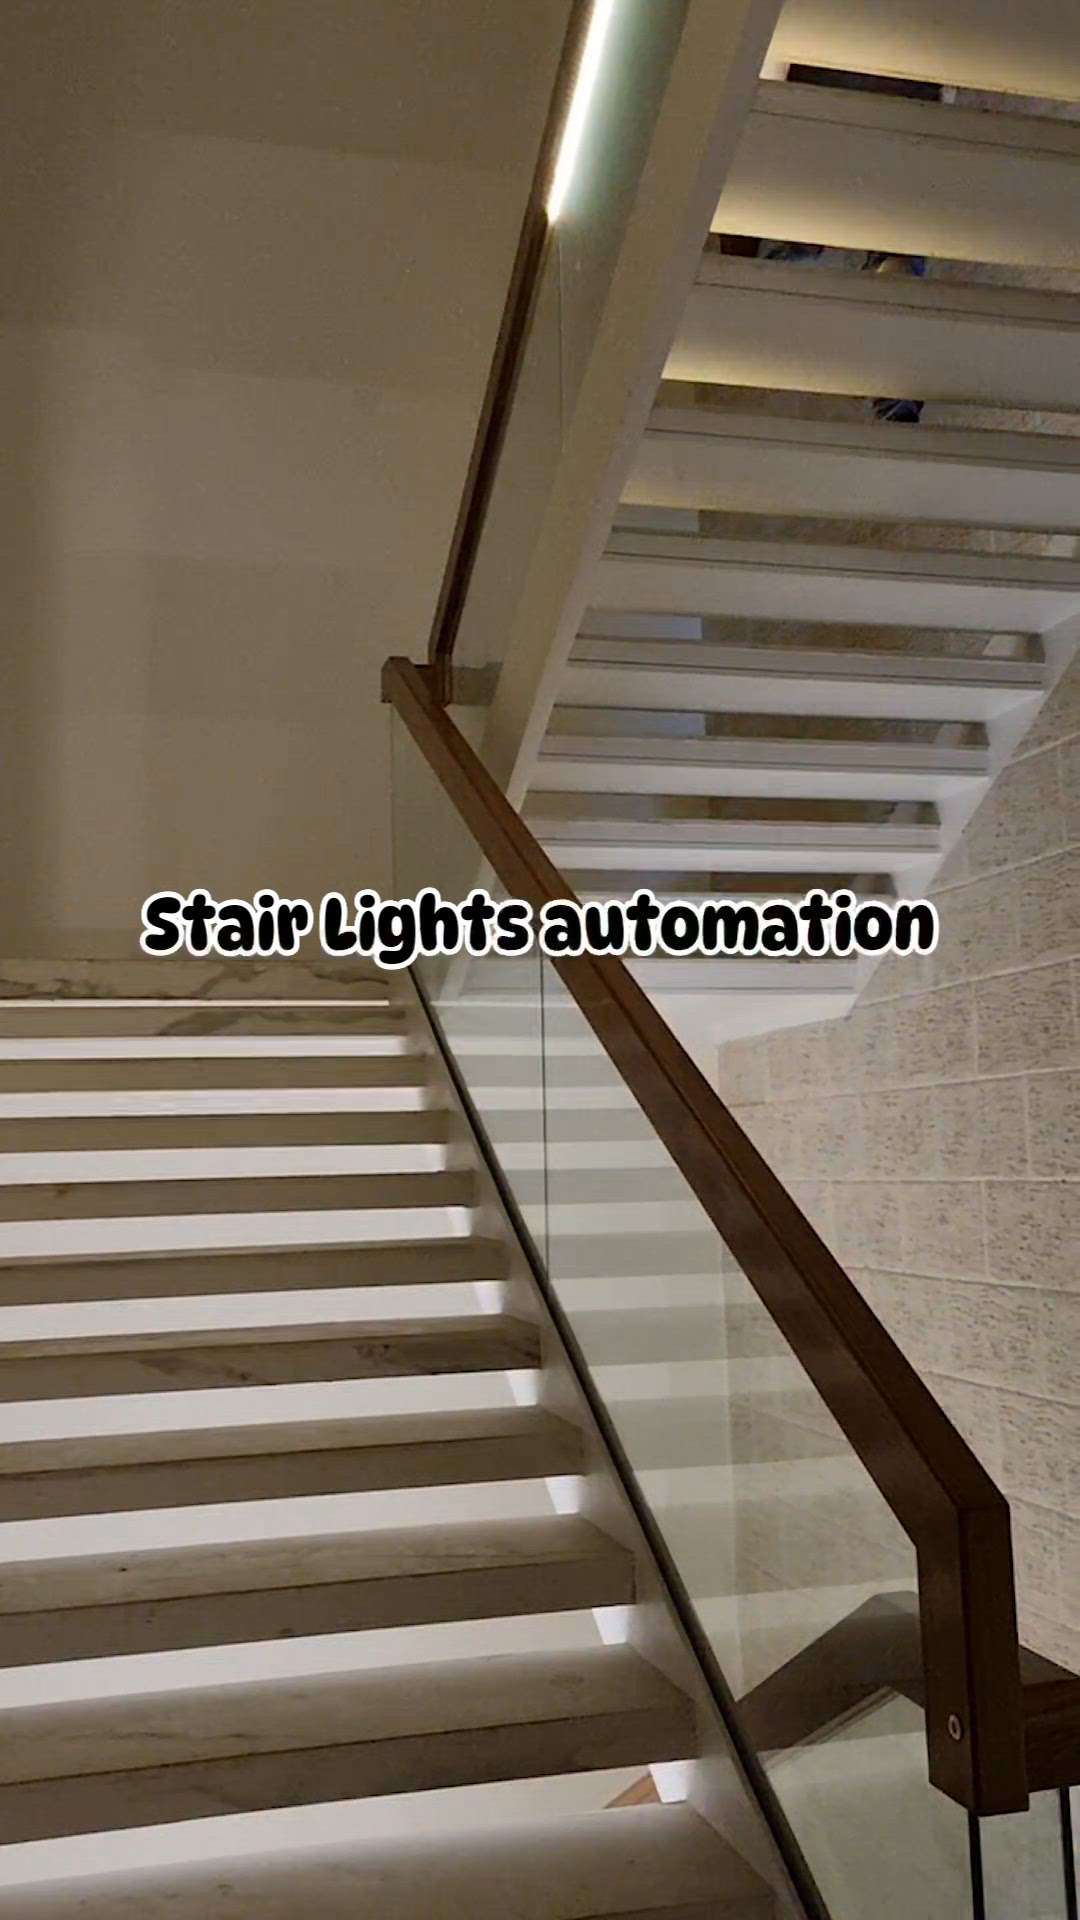 Stair lights automation
7206928056